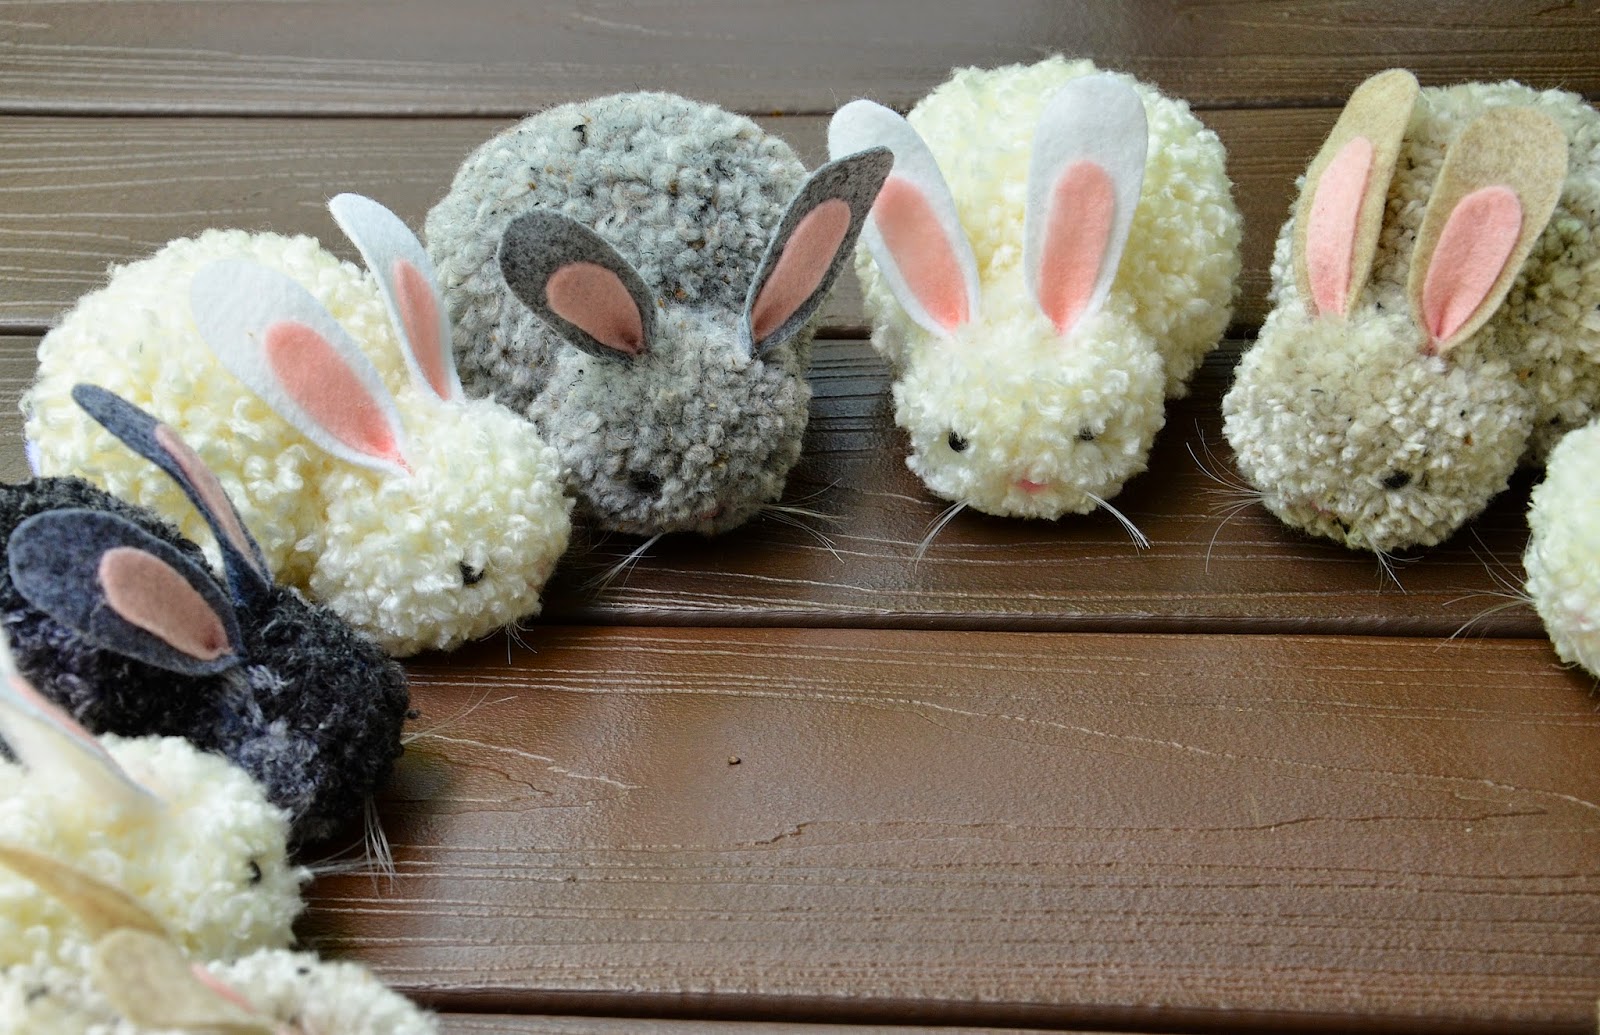 DIY KOALA PLUSH WITH WOOL POMPOMS ♥ EASY CRAFTS TO DO AT HOME